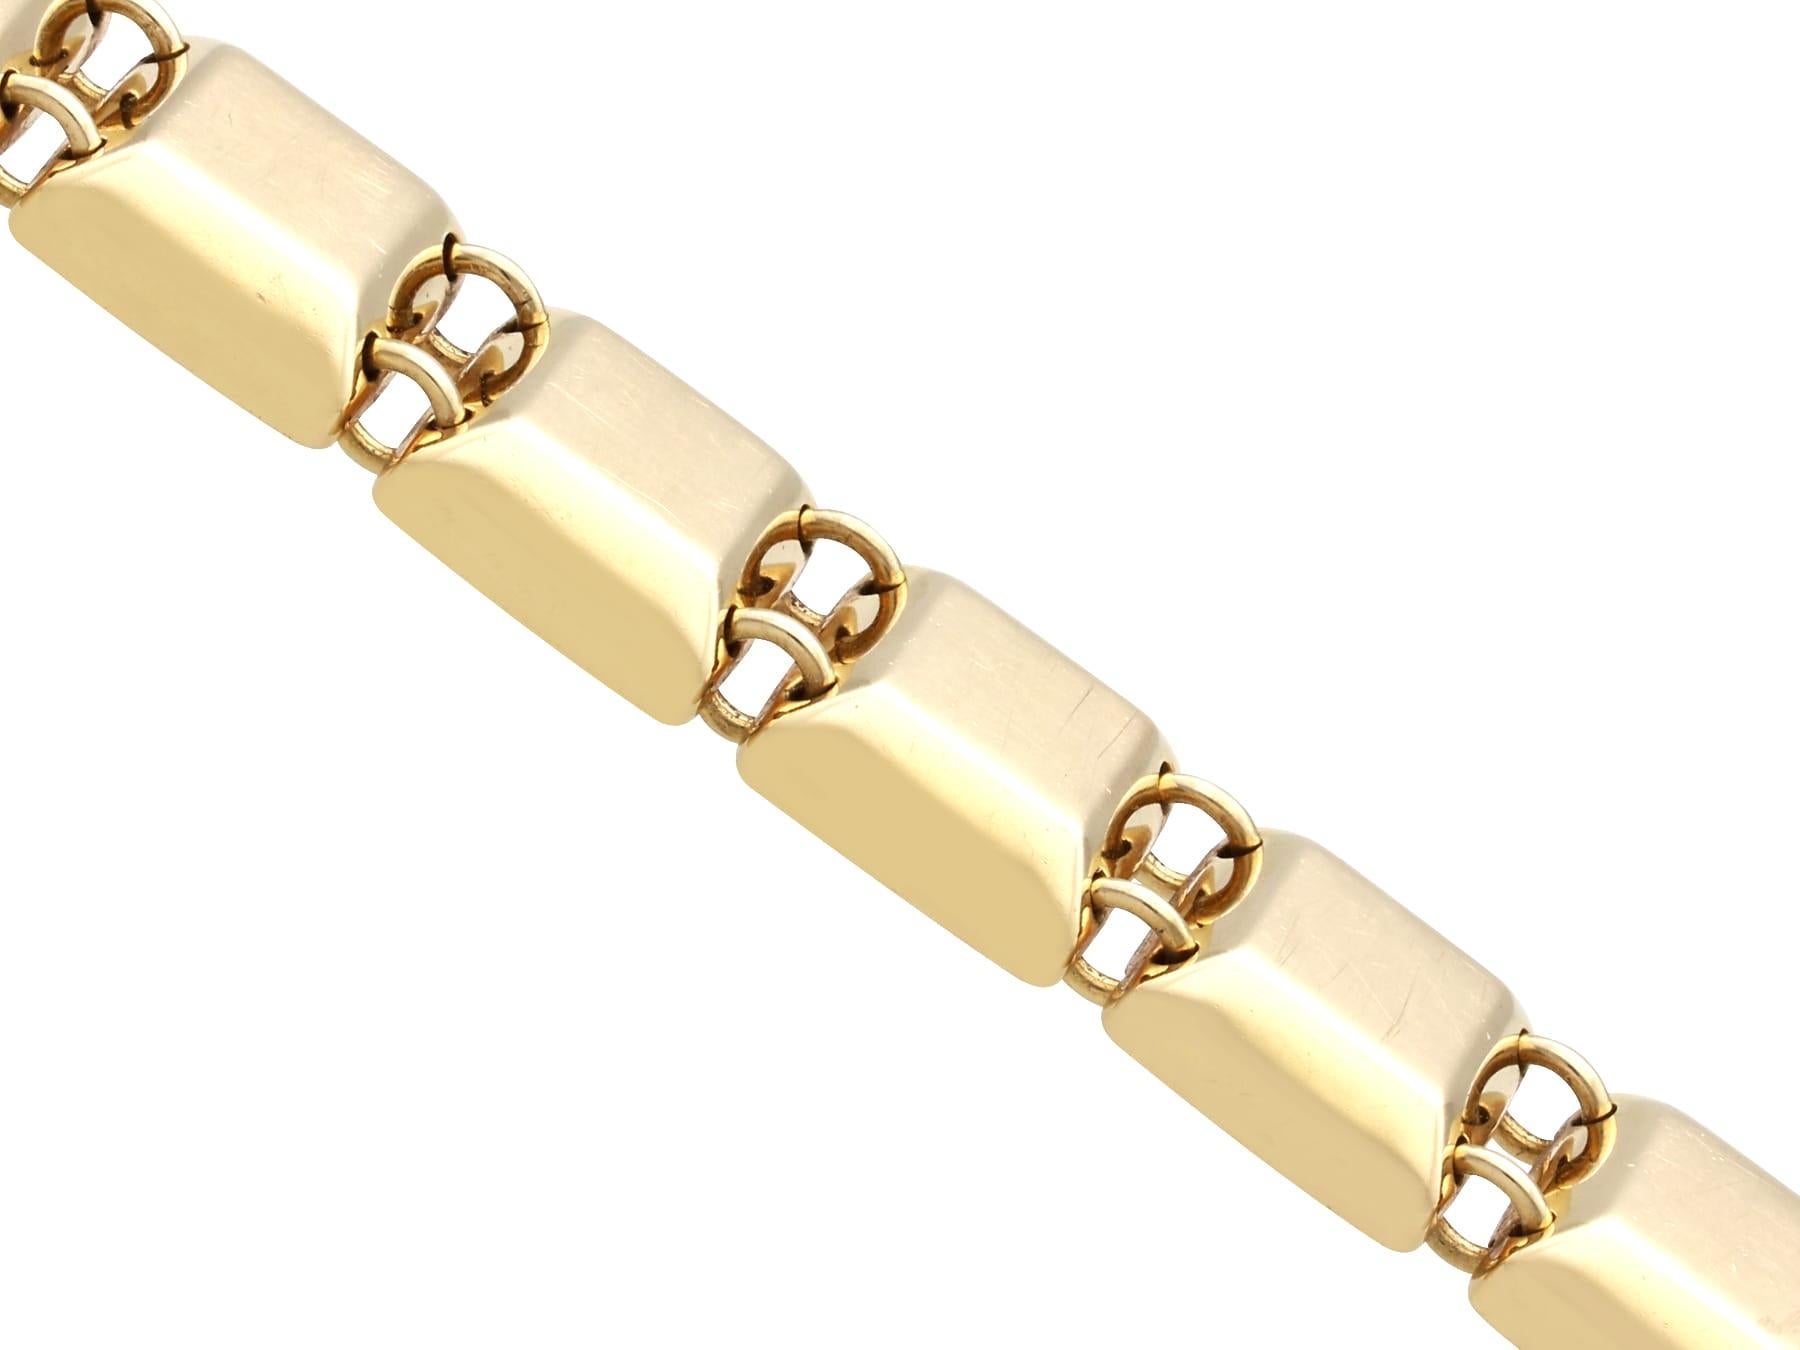 Vintage 18ct Yellow Gold Chaumet Bracelet French Circa 1940 For Sale 1